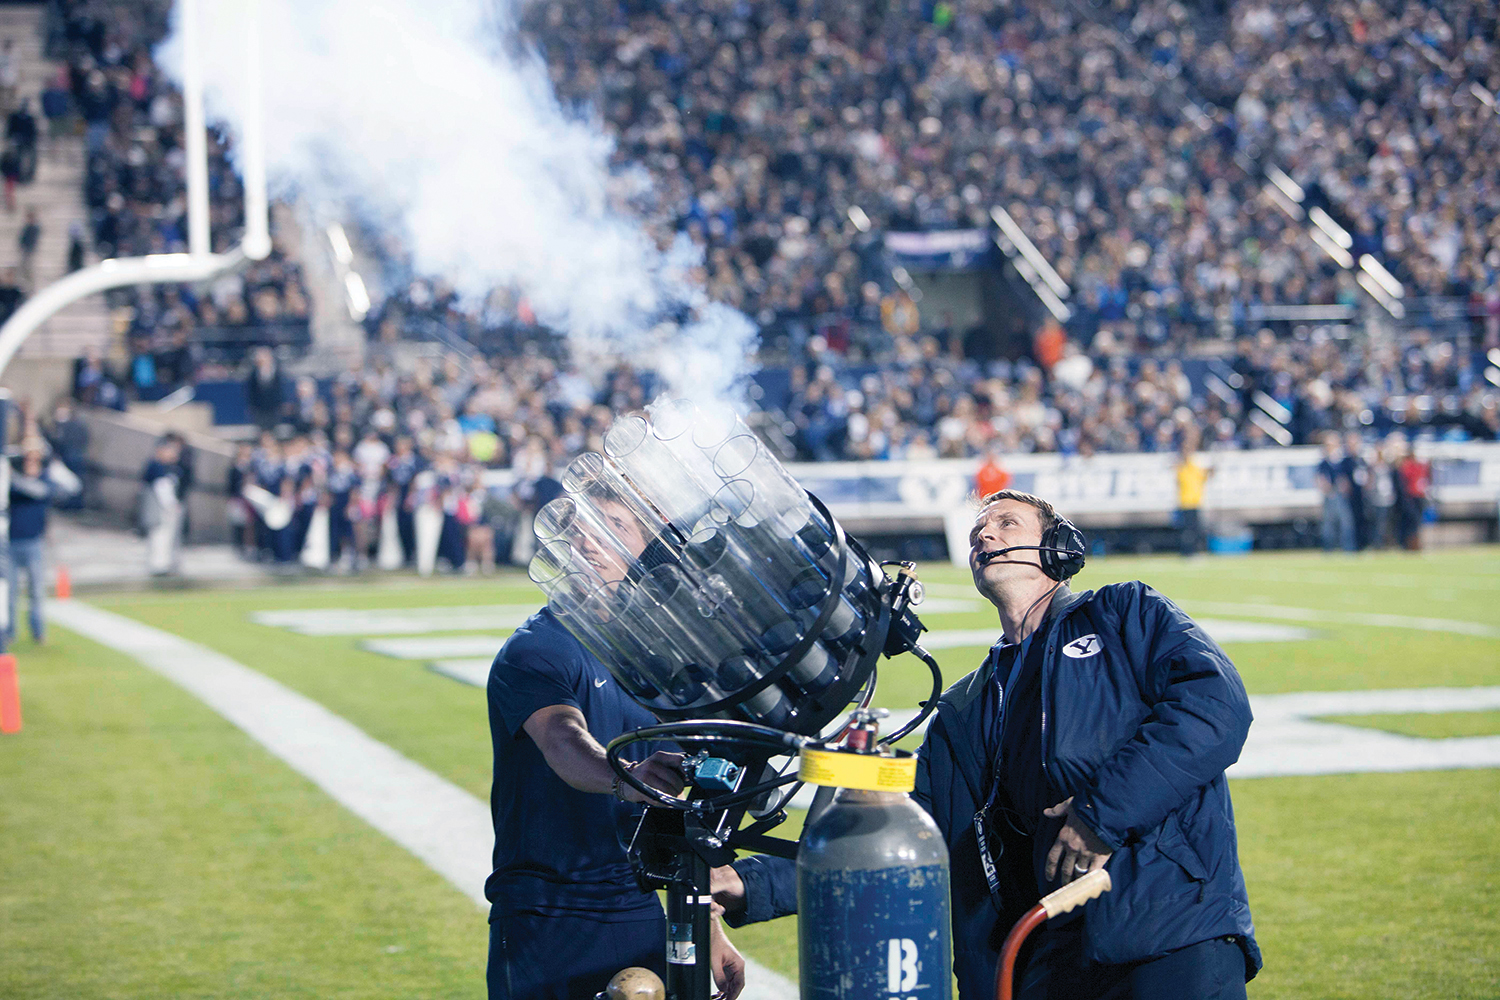 A BYU employee fires shirts into the stadium audience with a gatlin gun-styled launcher.